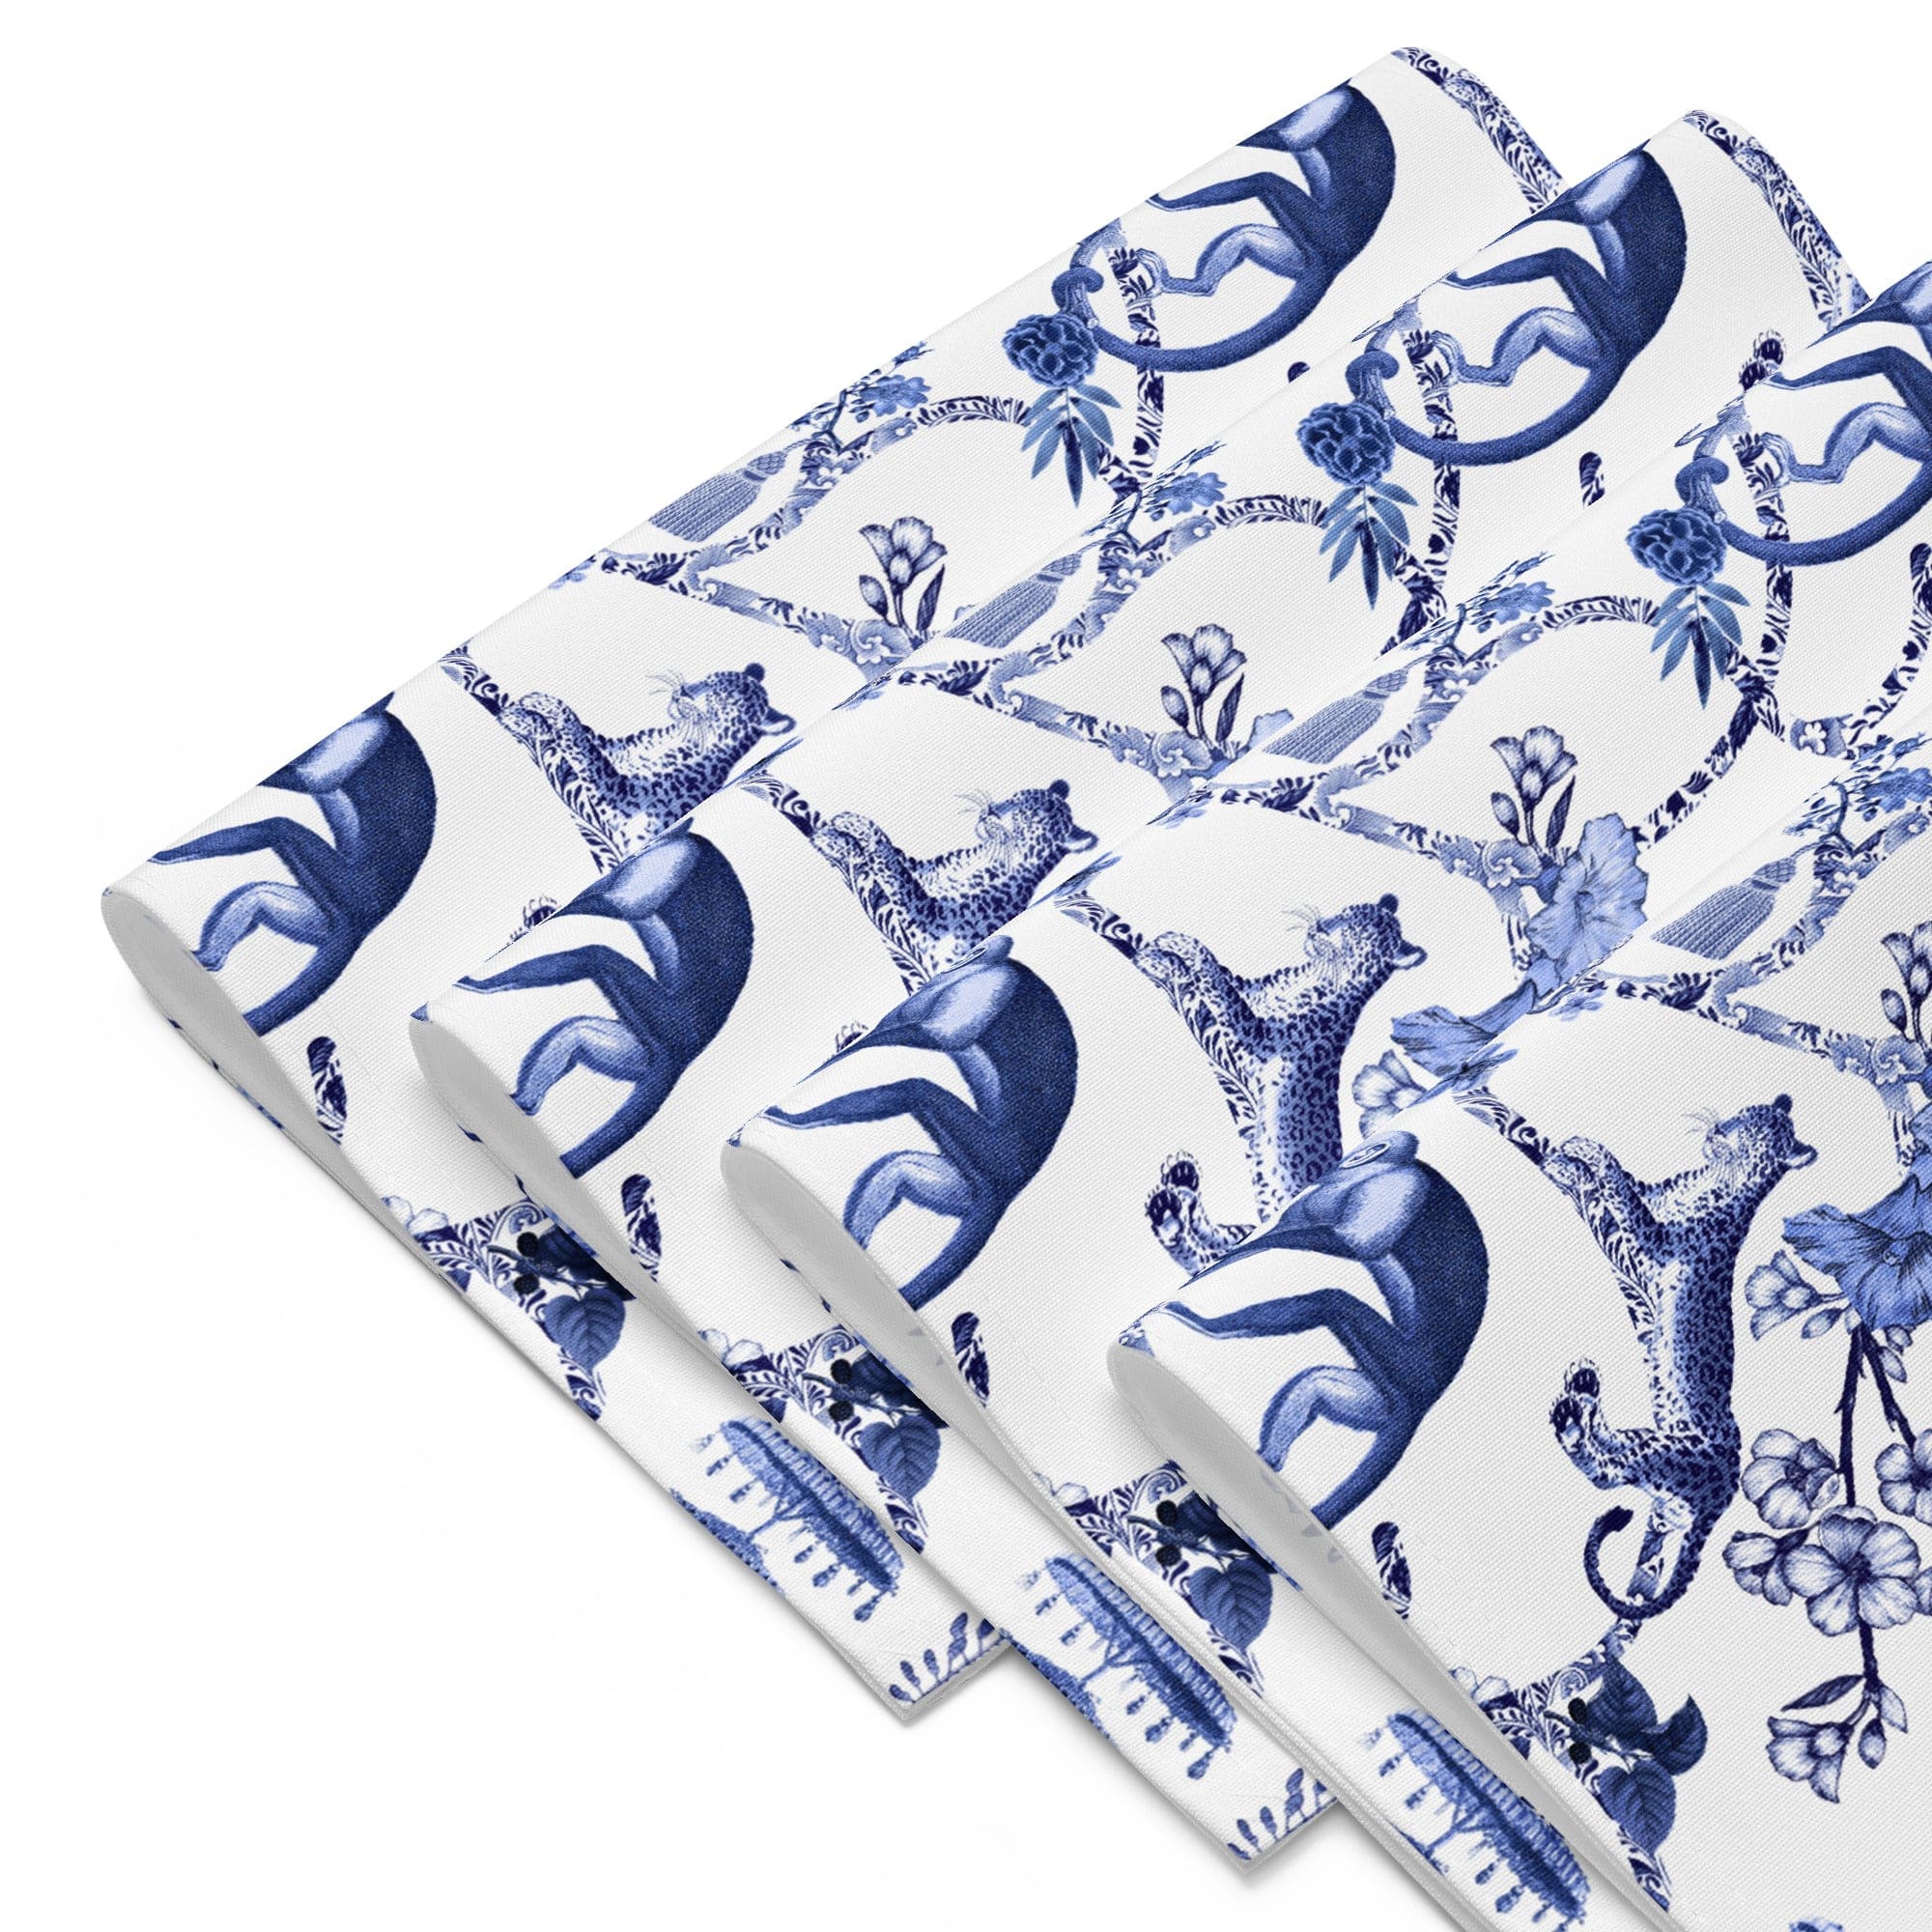 Kate McEnroe New York Chinoiserie Botanical Toile Placemats, Set of 4, Floral Blue and White Chinoiserie Jungle Table Linen, Farmhouse Decor Placemats 6256397_17484